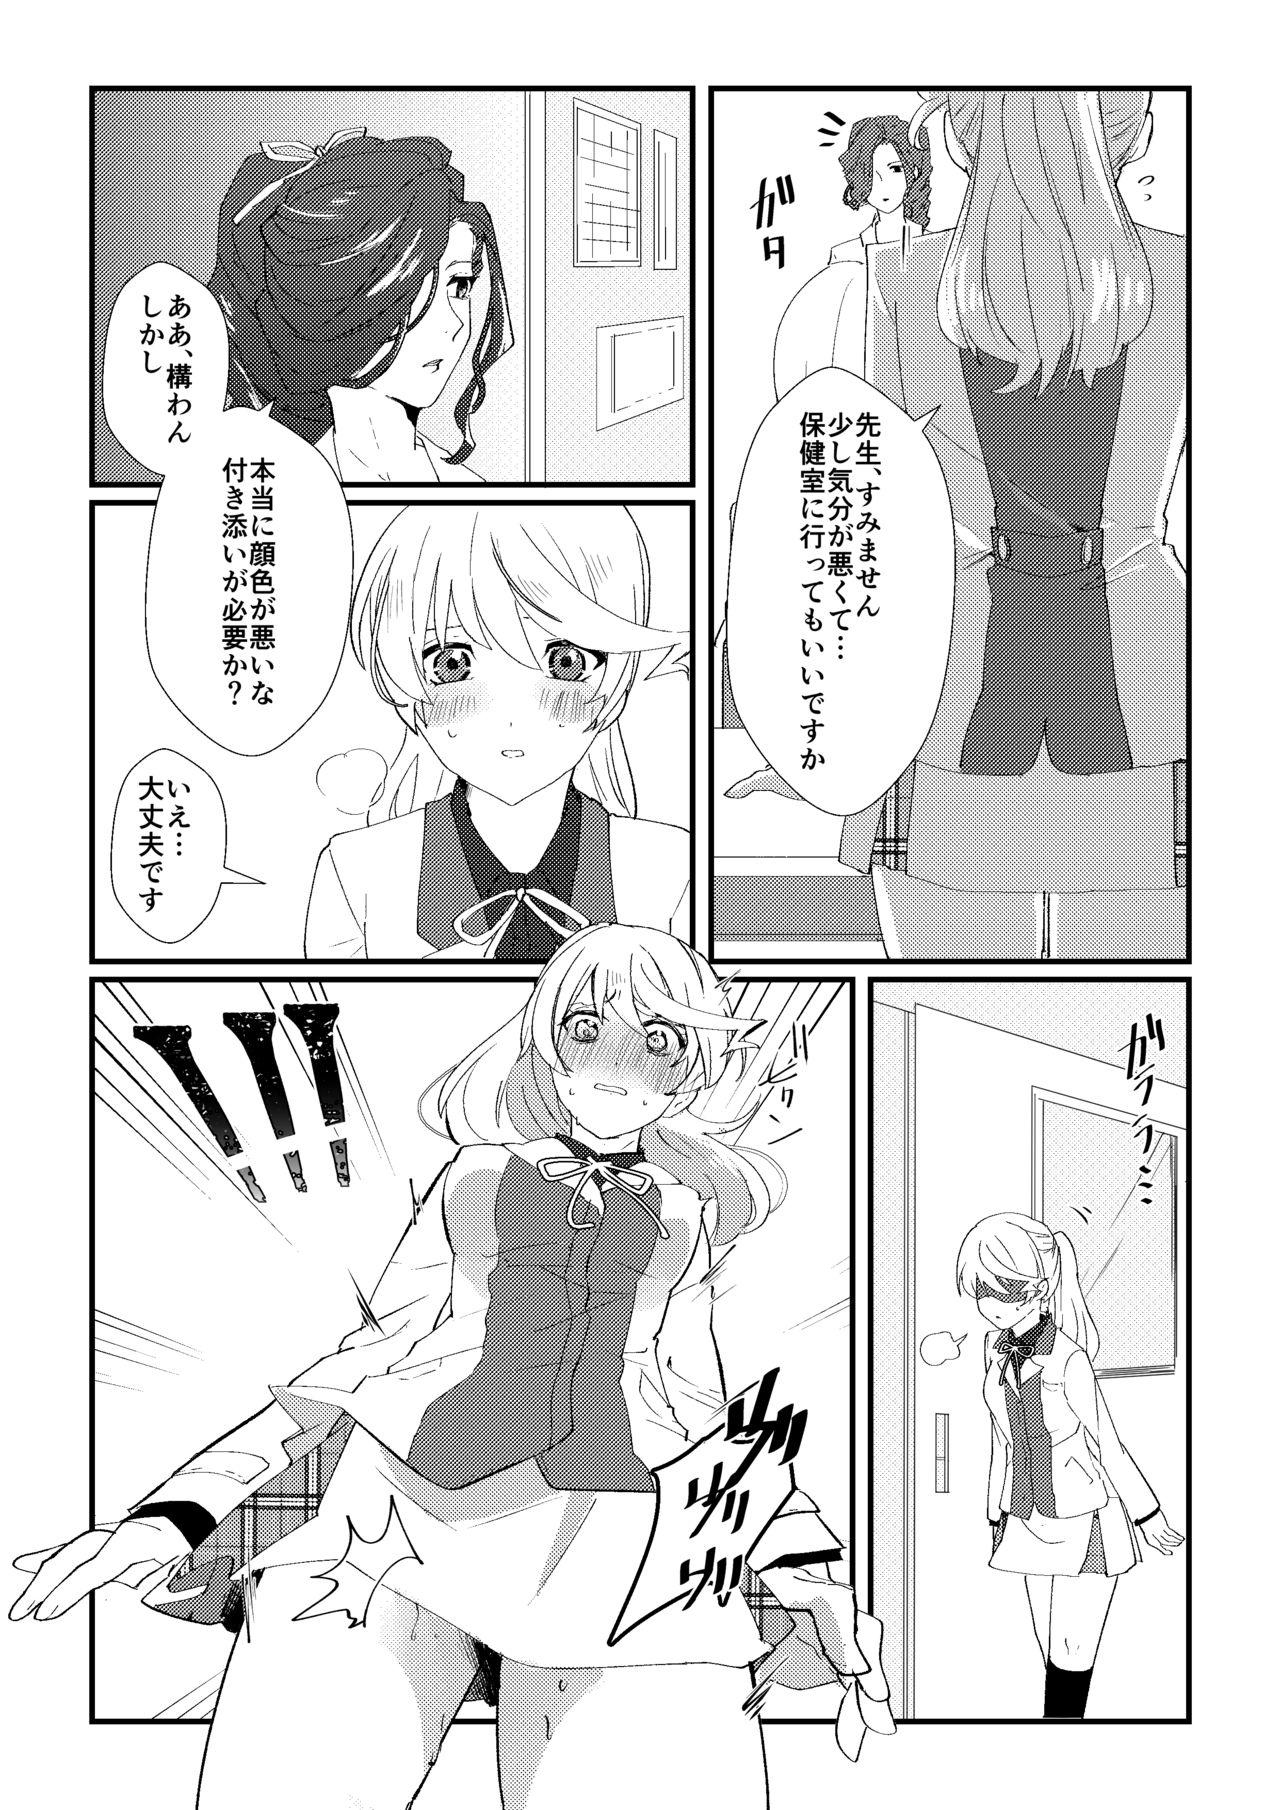 Ass Fucking crazy about you - Tales of zestiria Women - Page 3